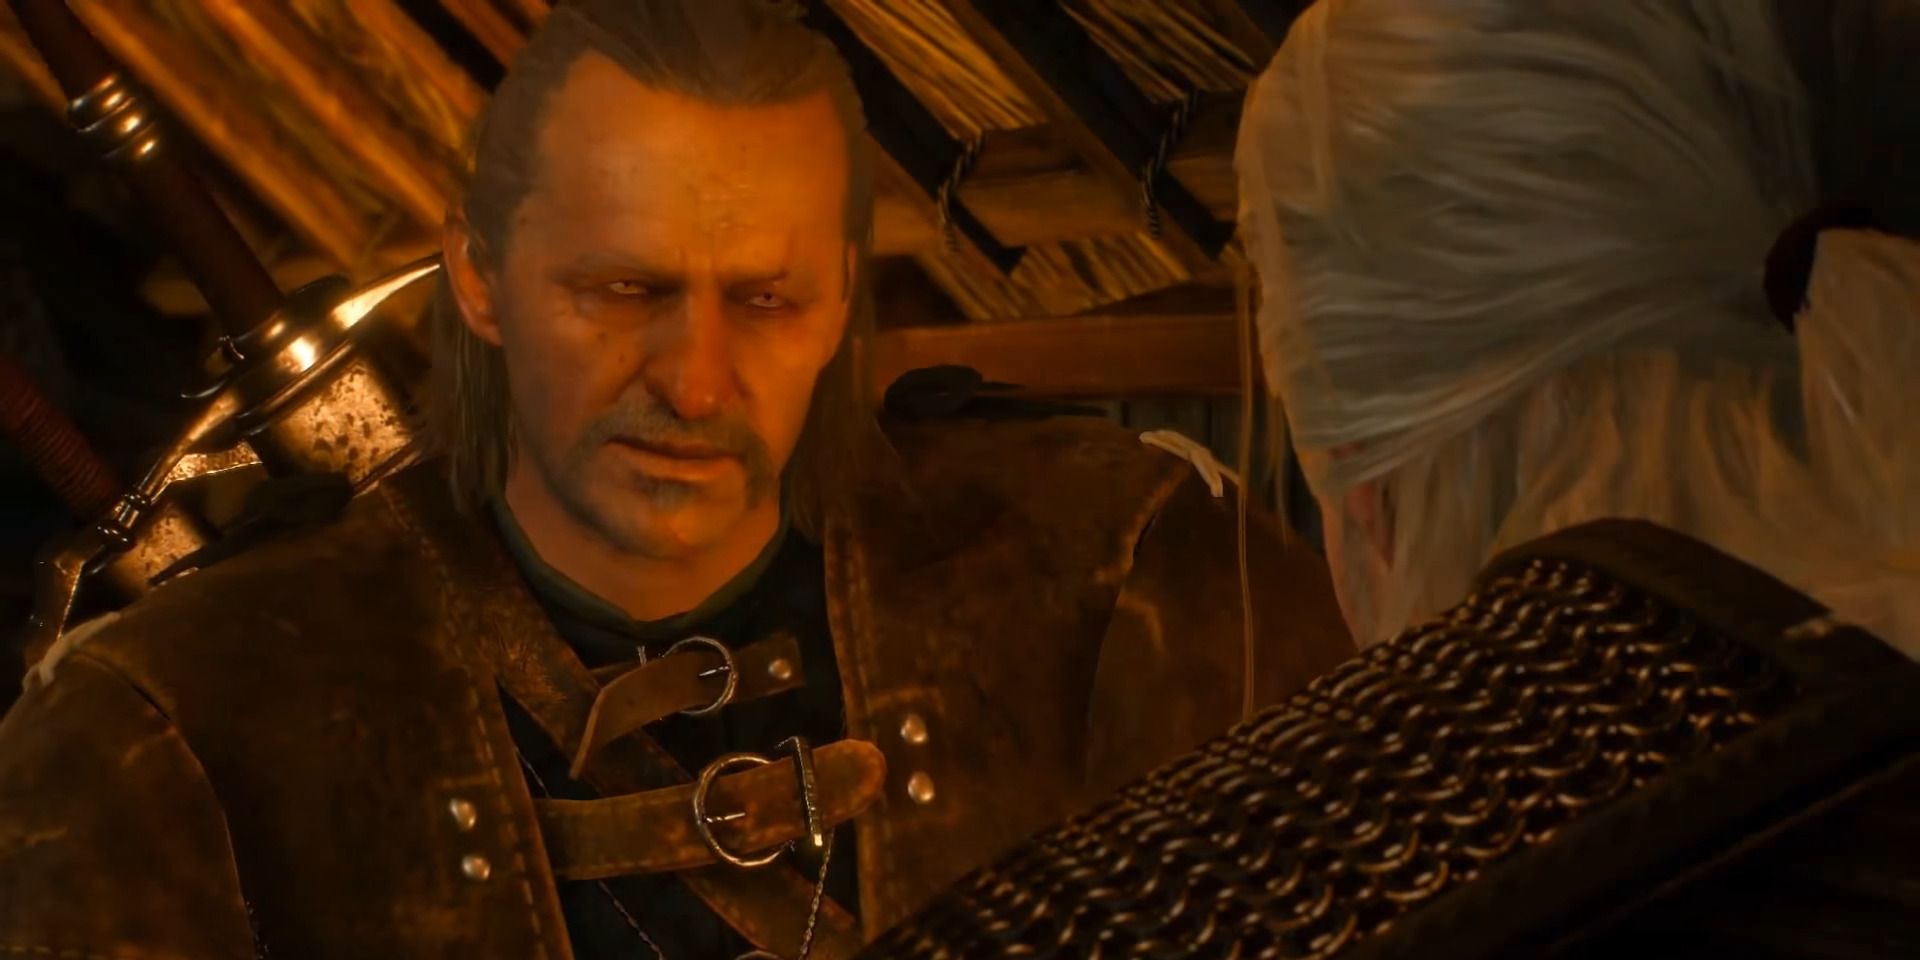 Geralt and Vesemir talking in a tavern in The Witcher 3